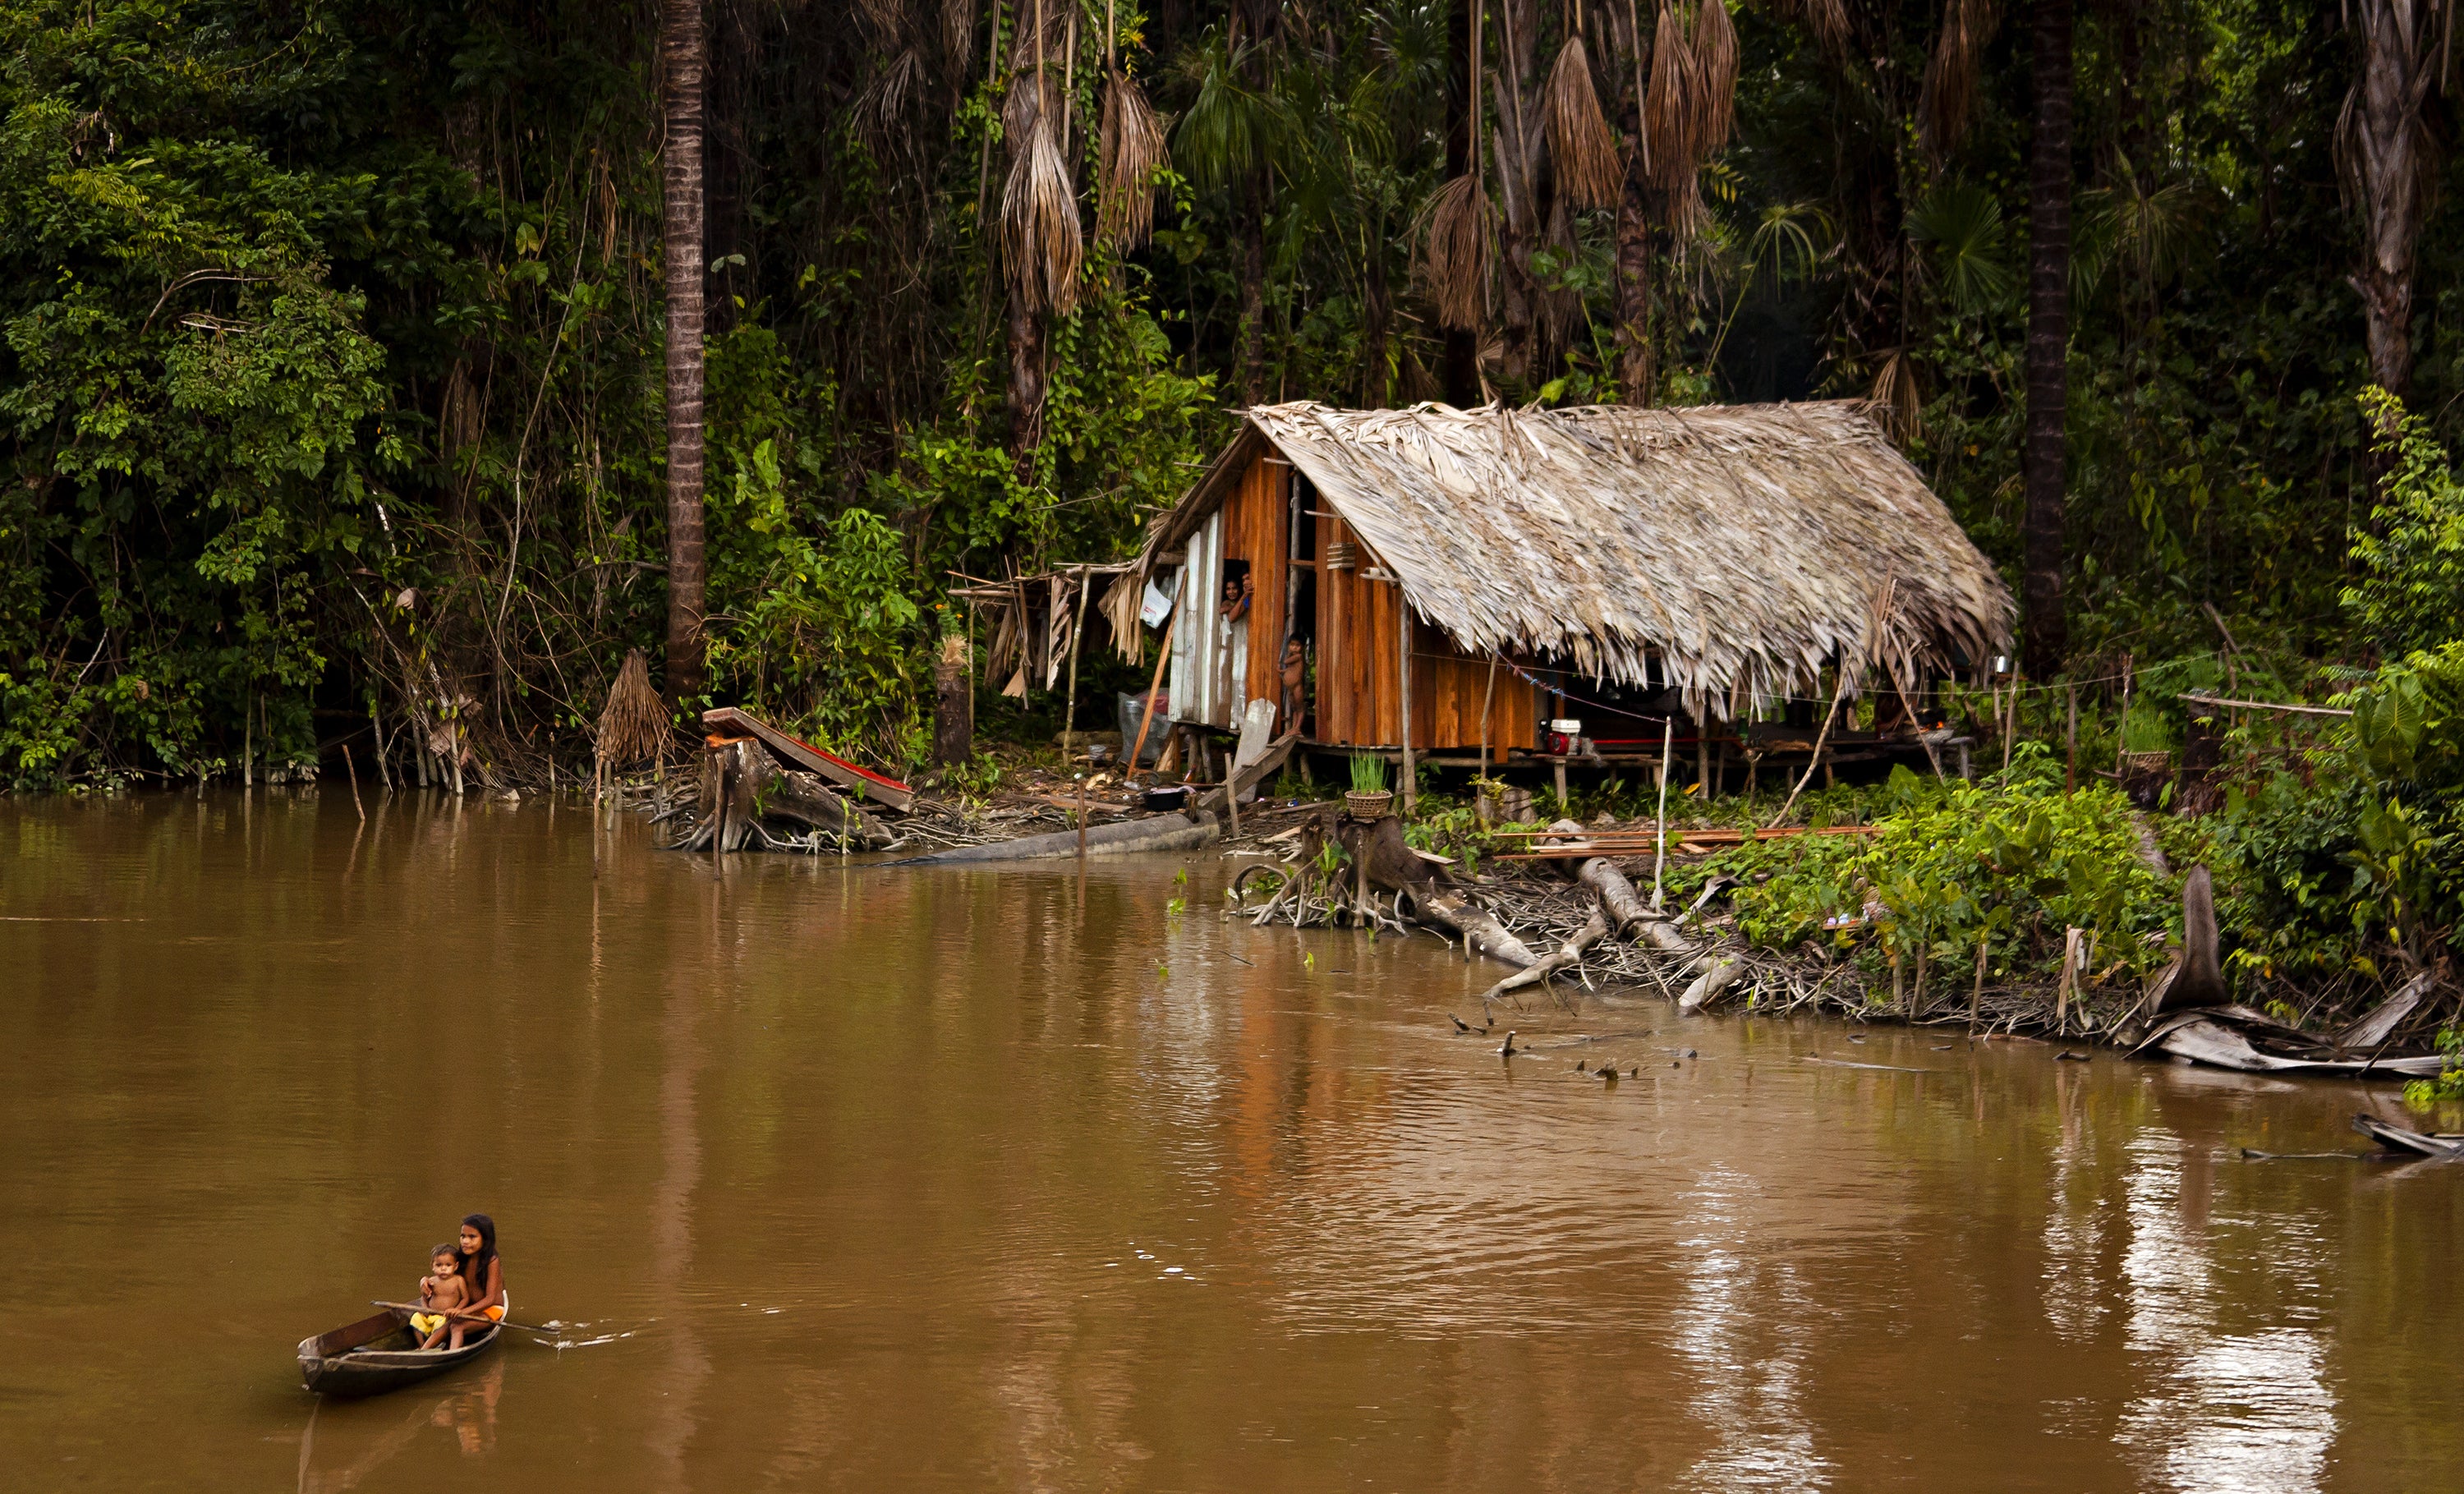 Deforestation, often illegal, of the Amazon rainforest is threatening the existence of the indigenous communities